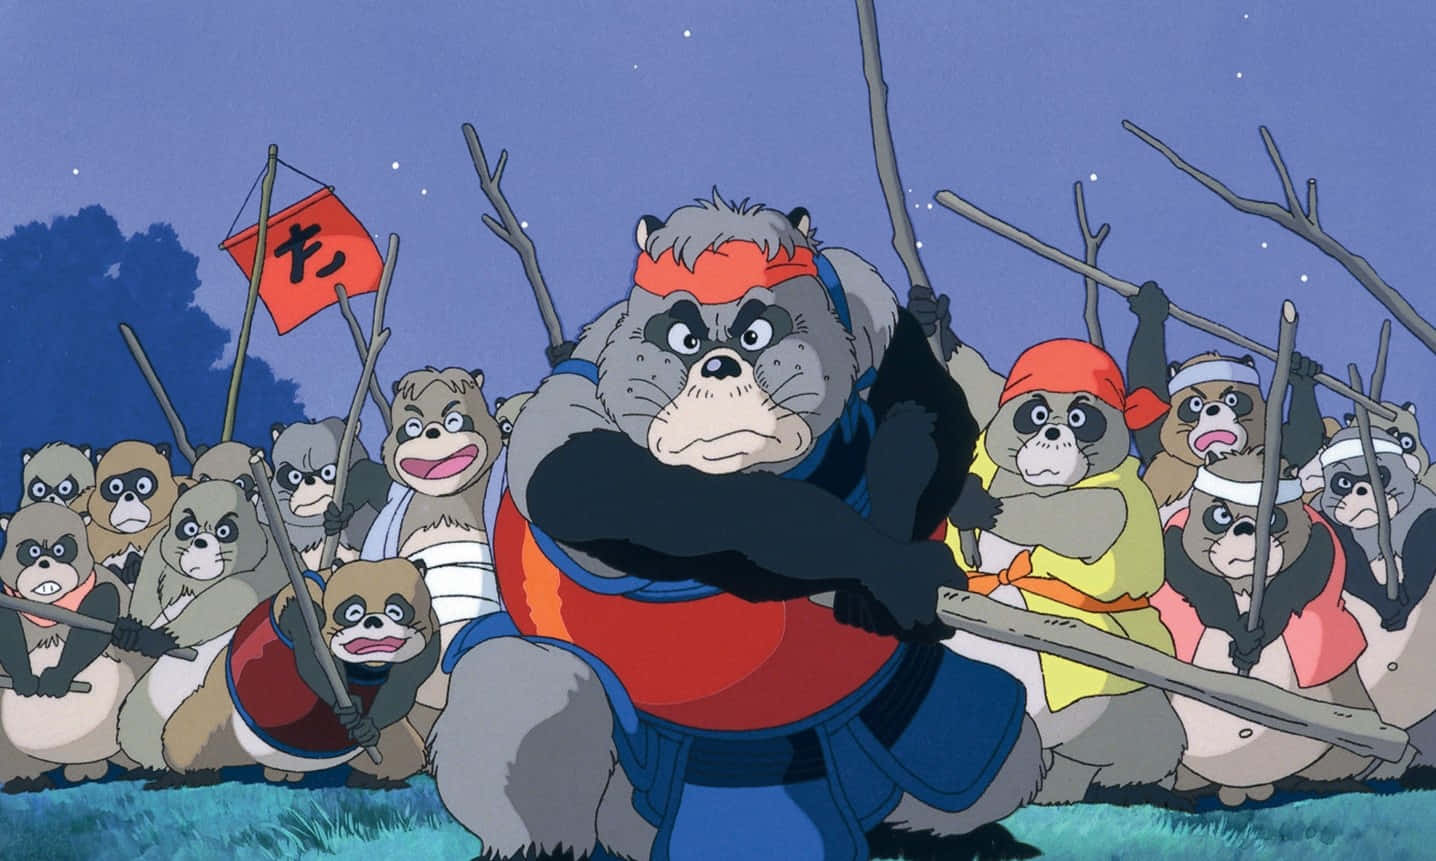 A group of shape-shifting tanuki from the enchanting world of Pom Poko Wallpaper